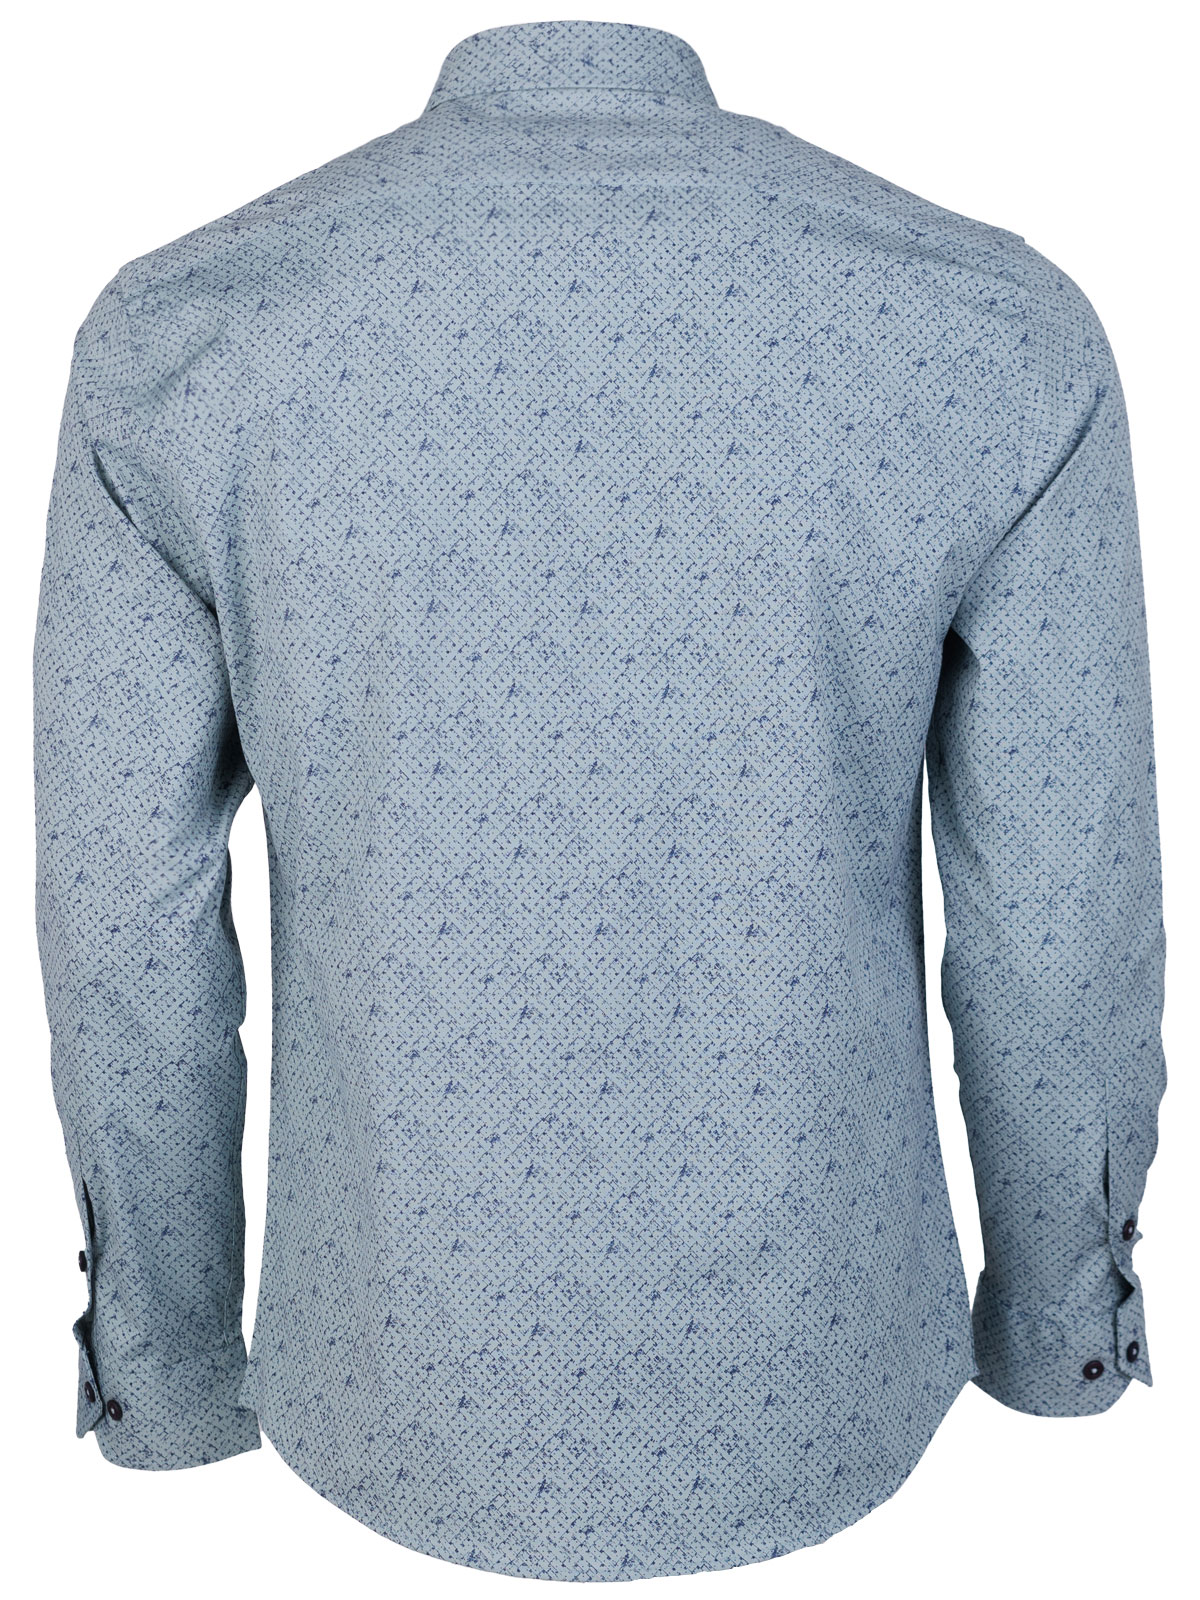 Shirt in mint color with max figures - 21614 € 0.00 img2